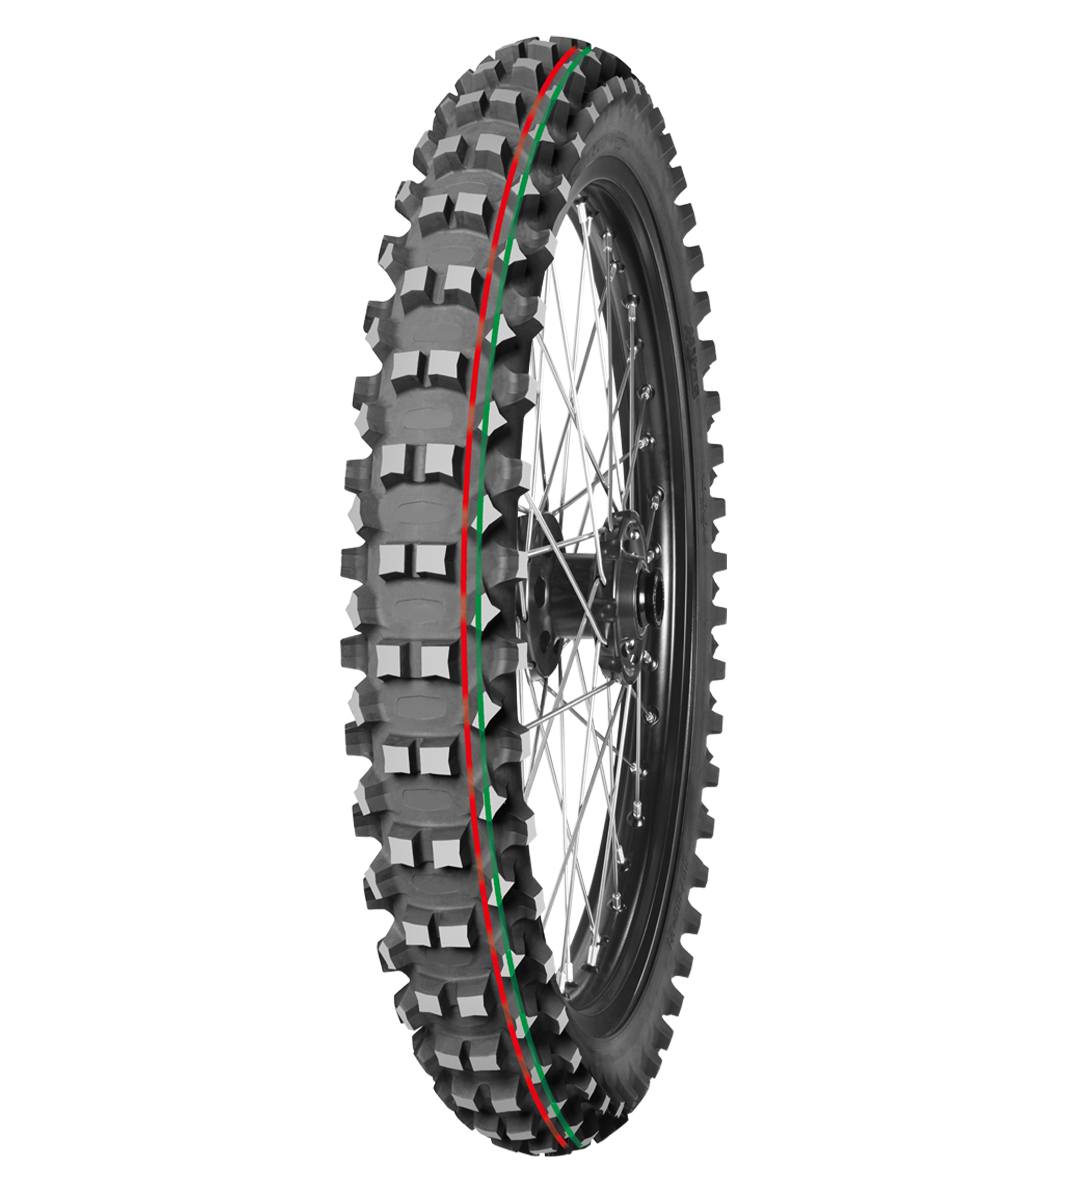 Mitas TERRA FORCE-MX MH 80/100-21 Motocross Competition Off-Road MEDIUM TO HARD 51M Red &amp; Green Tube Front Tire, 226733, 80/100-21, Front, Motocross, Motocross Competition, Off-Road, Terra Force, Terra Force-MX MH, Trail, Tires - Imported and distributed in North &amp; South America by Lindeco Genuine Powersports - Premier Powersports Equipment and Accessories for Motorcycle Enthusiasts, Professional Riders and Dealers.